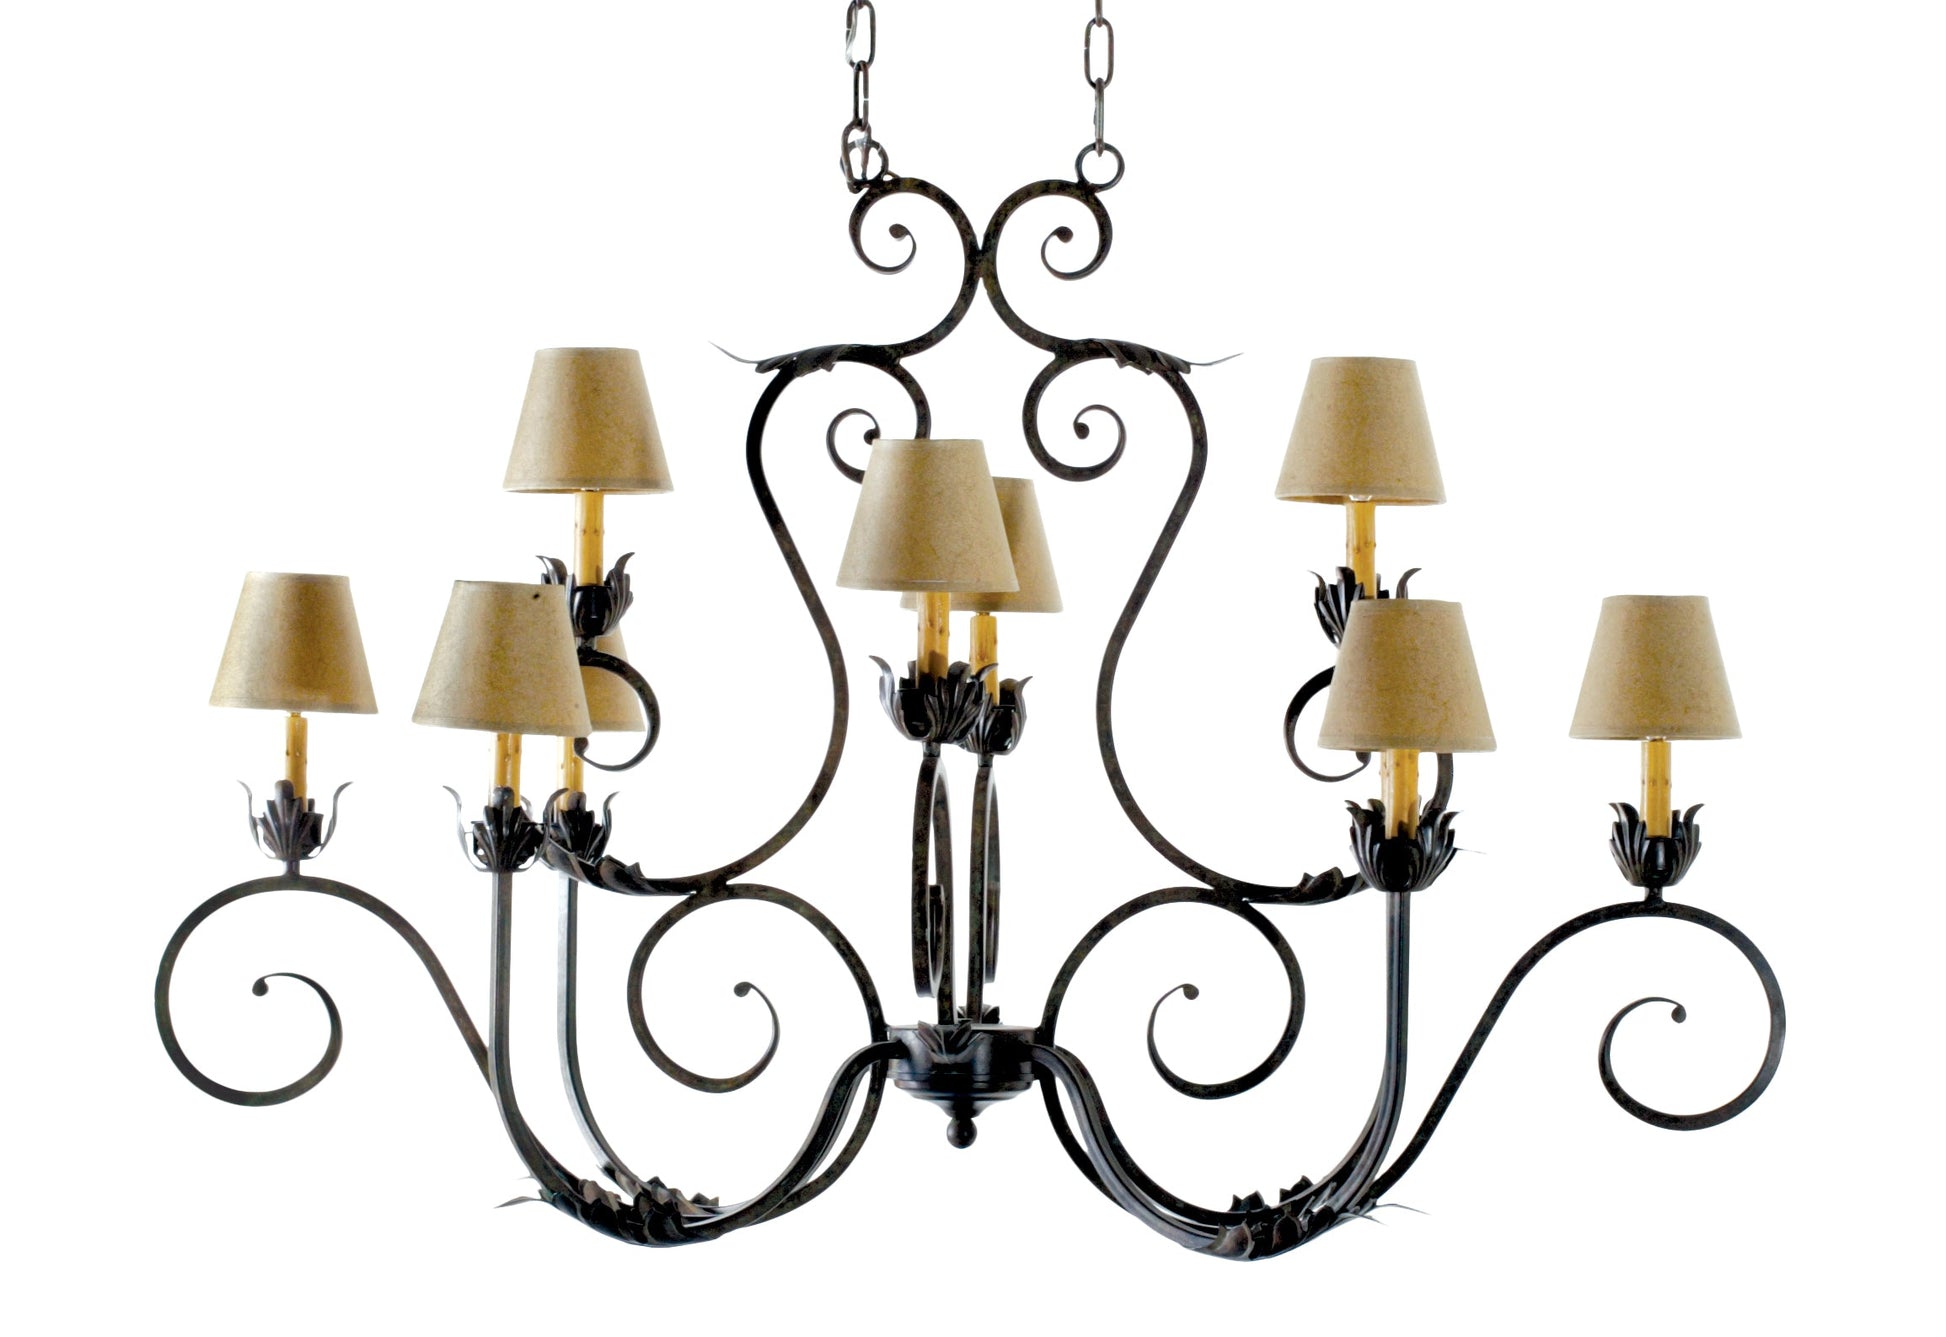 48" Long Claire 10-Light Oblong Chandelier by 2nd Ave Lighting